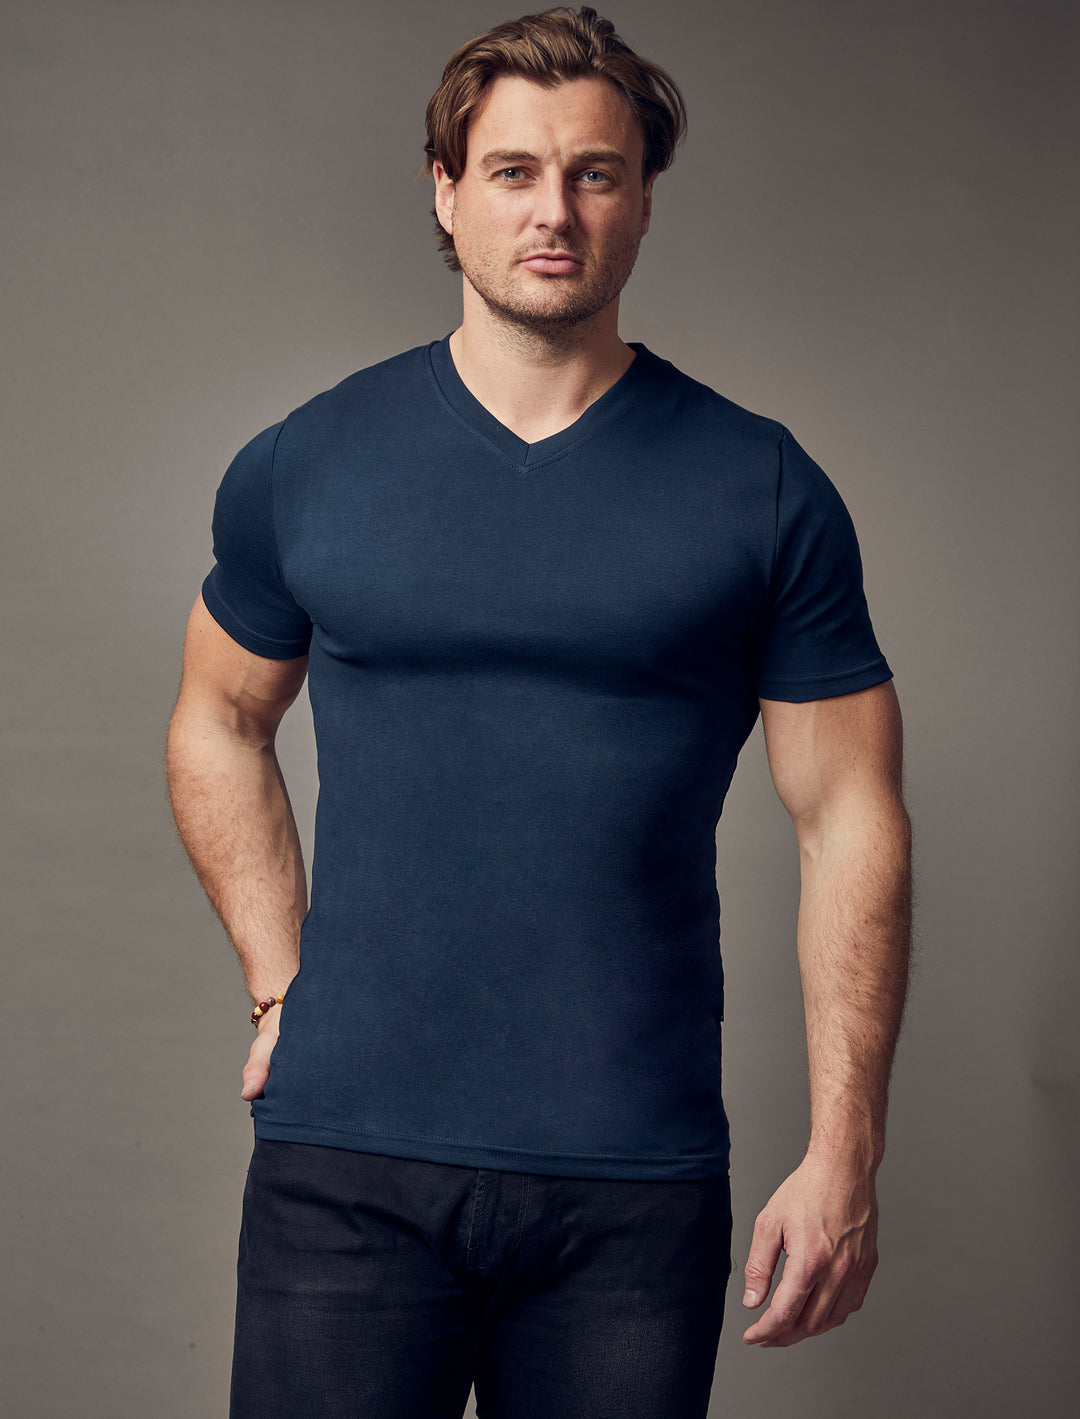 navy V-neck tapered fit t-shirt by Tapered Menswear, showcasing the muscle fit design for a comfortable and well-sculpted appearance